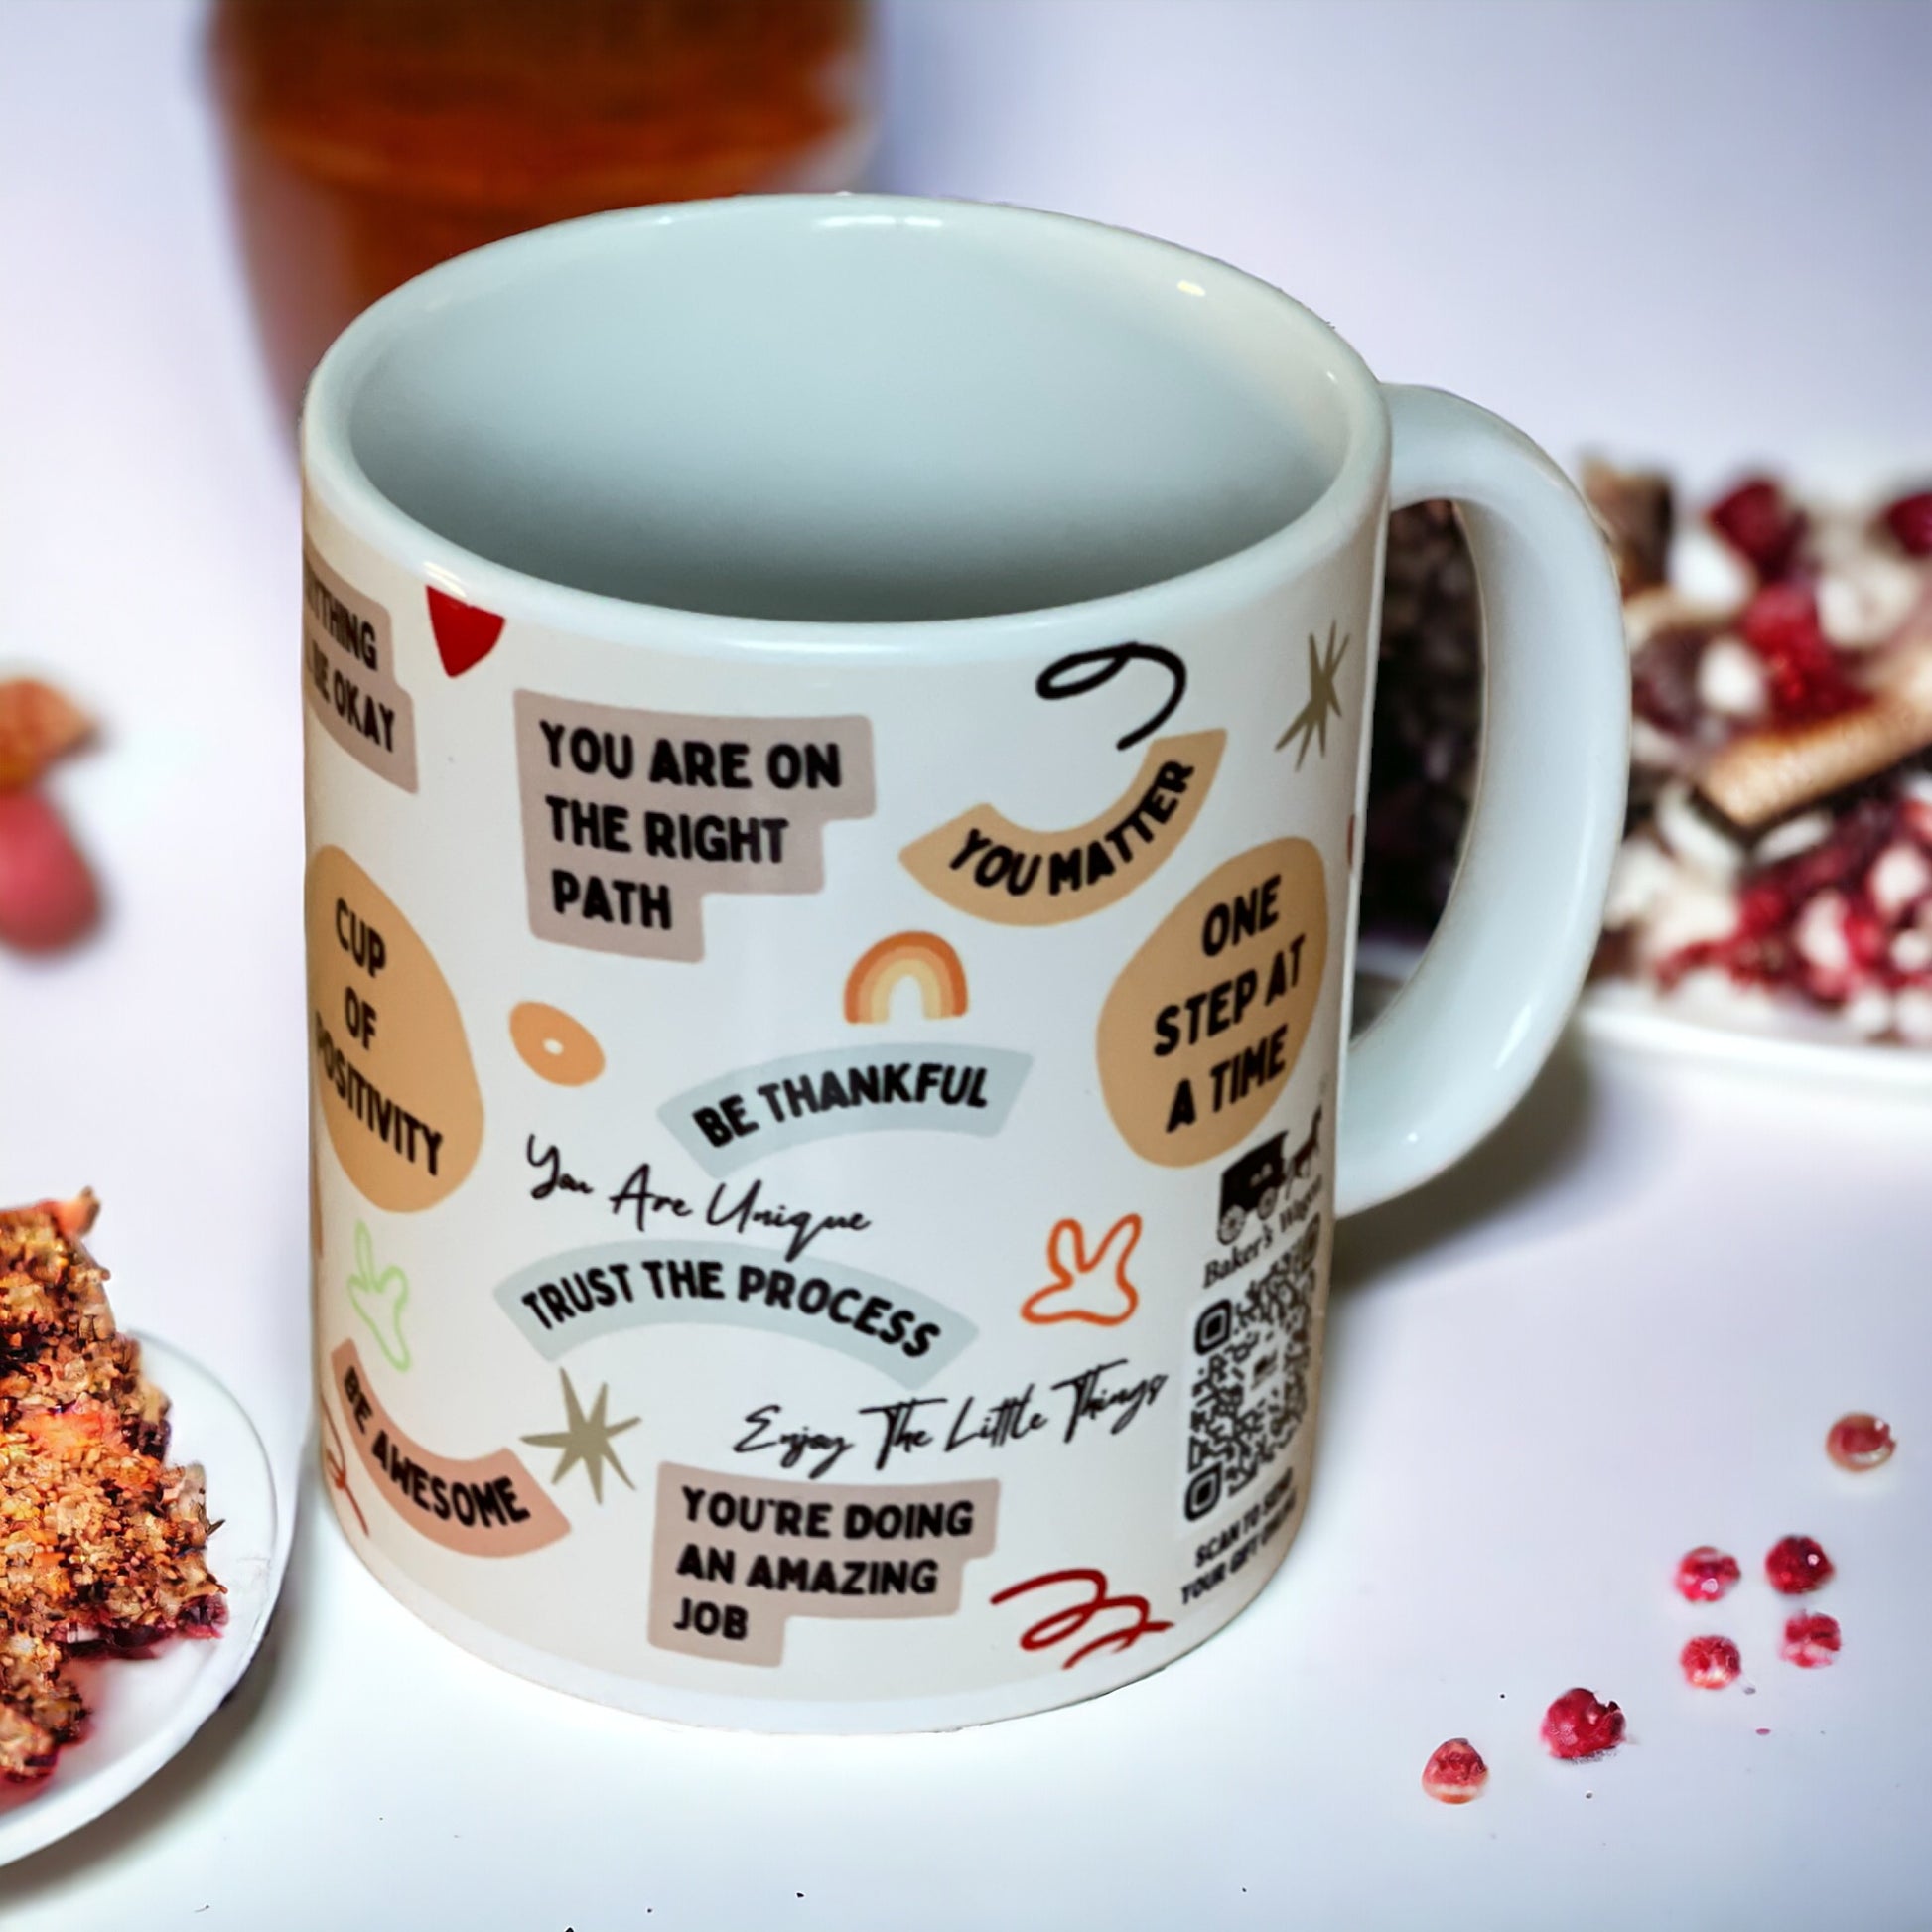 Buy or send mug of positivity online with Bakers Wagon